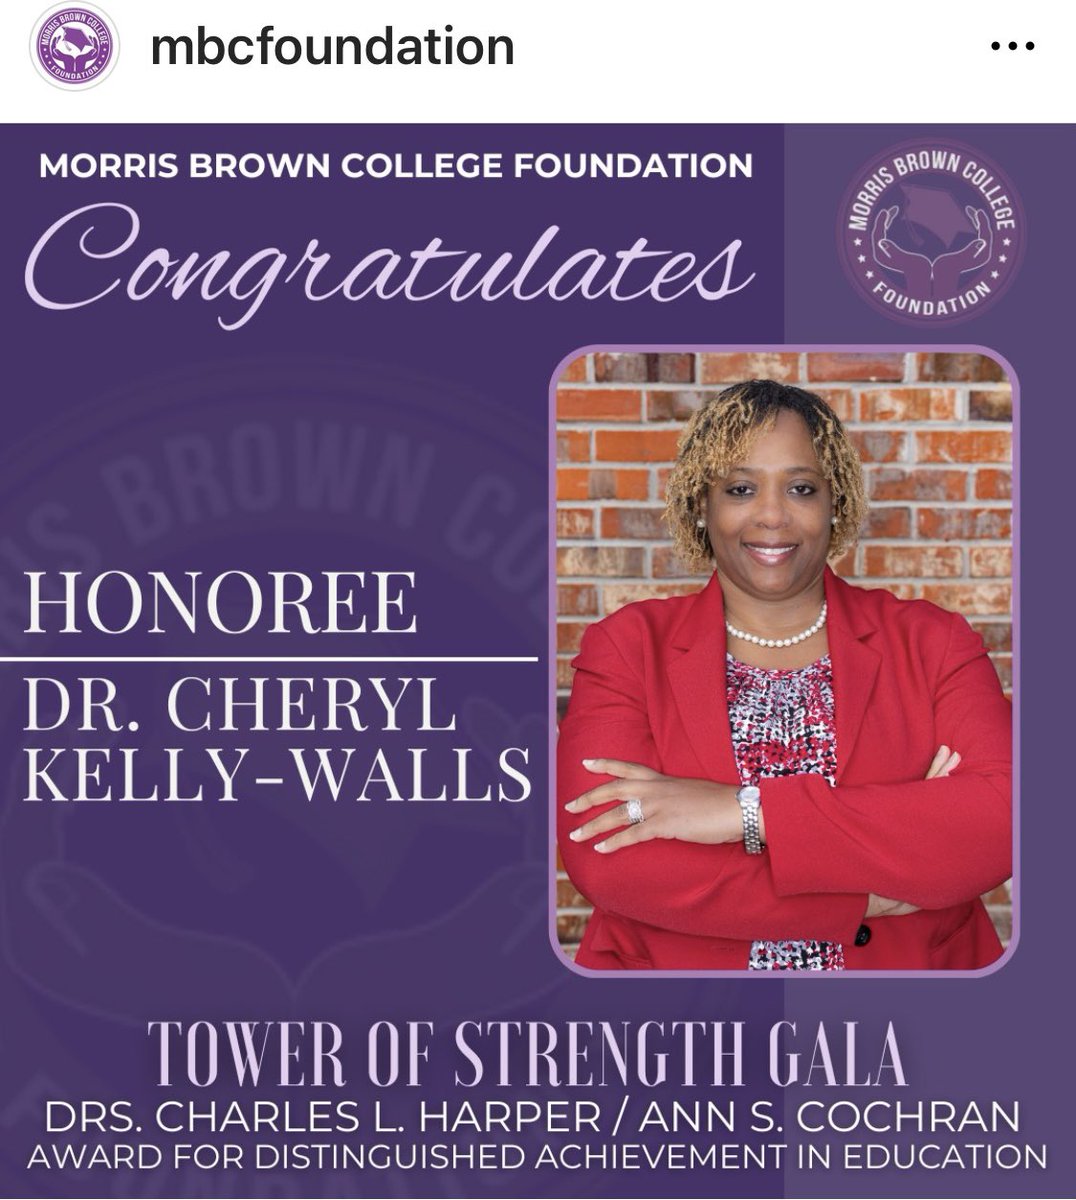 Exciting moment for me to be honored last night at the Tower of Strength Gala for Morris Brown College, My dad was truly amazed.  I was recognized for Distinguished Achievement in  Education. #mbcfoundation #honoredtobehonored #daddydaughtertime #mbcfgala #ilovemyhbcu